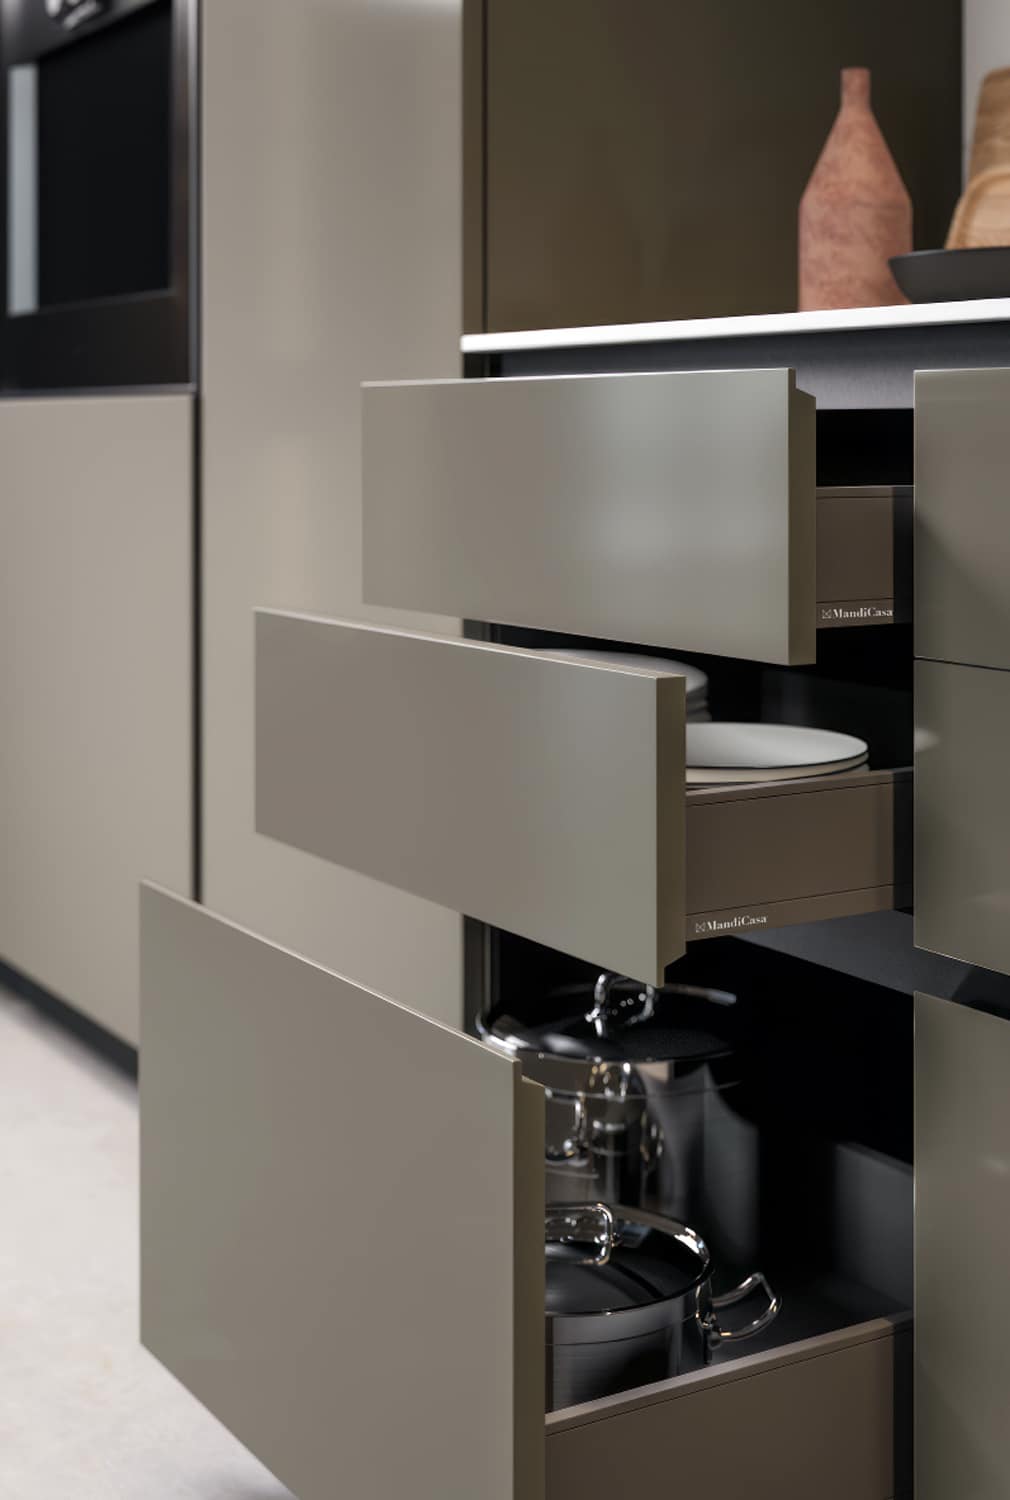 Detail of the Diamond cabinet doors with integrated handles.